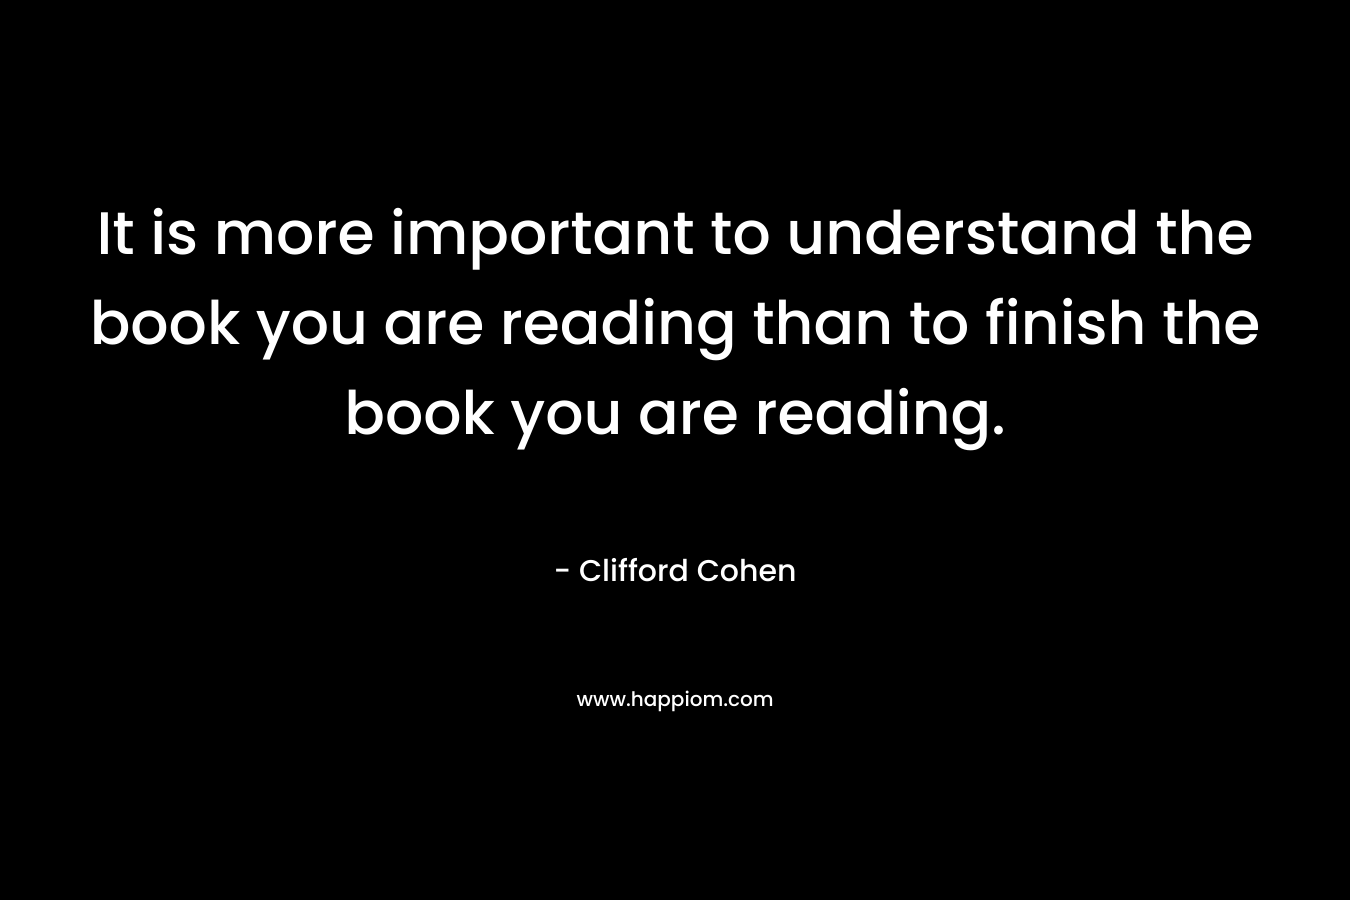 It is more important to understand the book you are reading than to finish the book you are reading. – Clifford Cohen